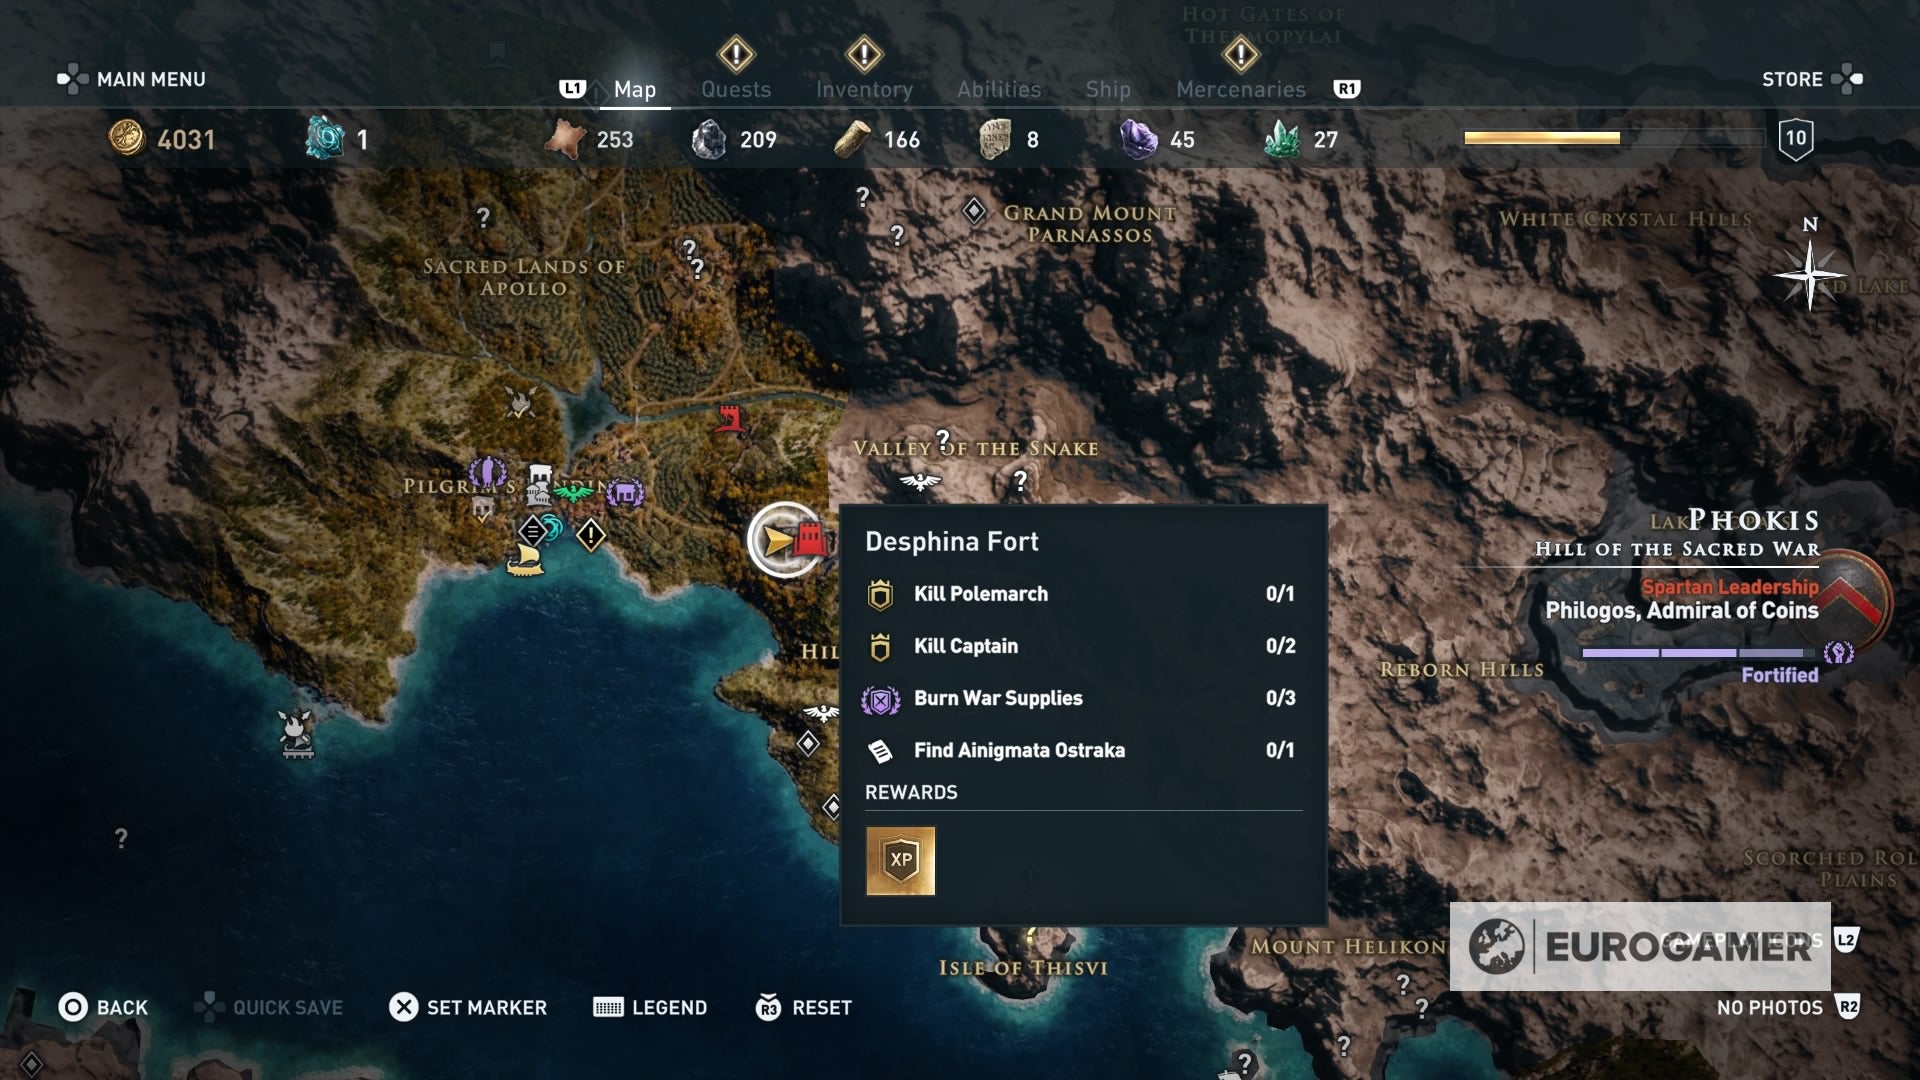 Assassin's Creed Odyssey - Pressed for Time, A Finger Tip riddle solutions and where to find the Sacred Lands of Despina Fort tablets | Eurogamer.net